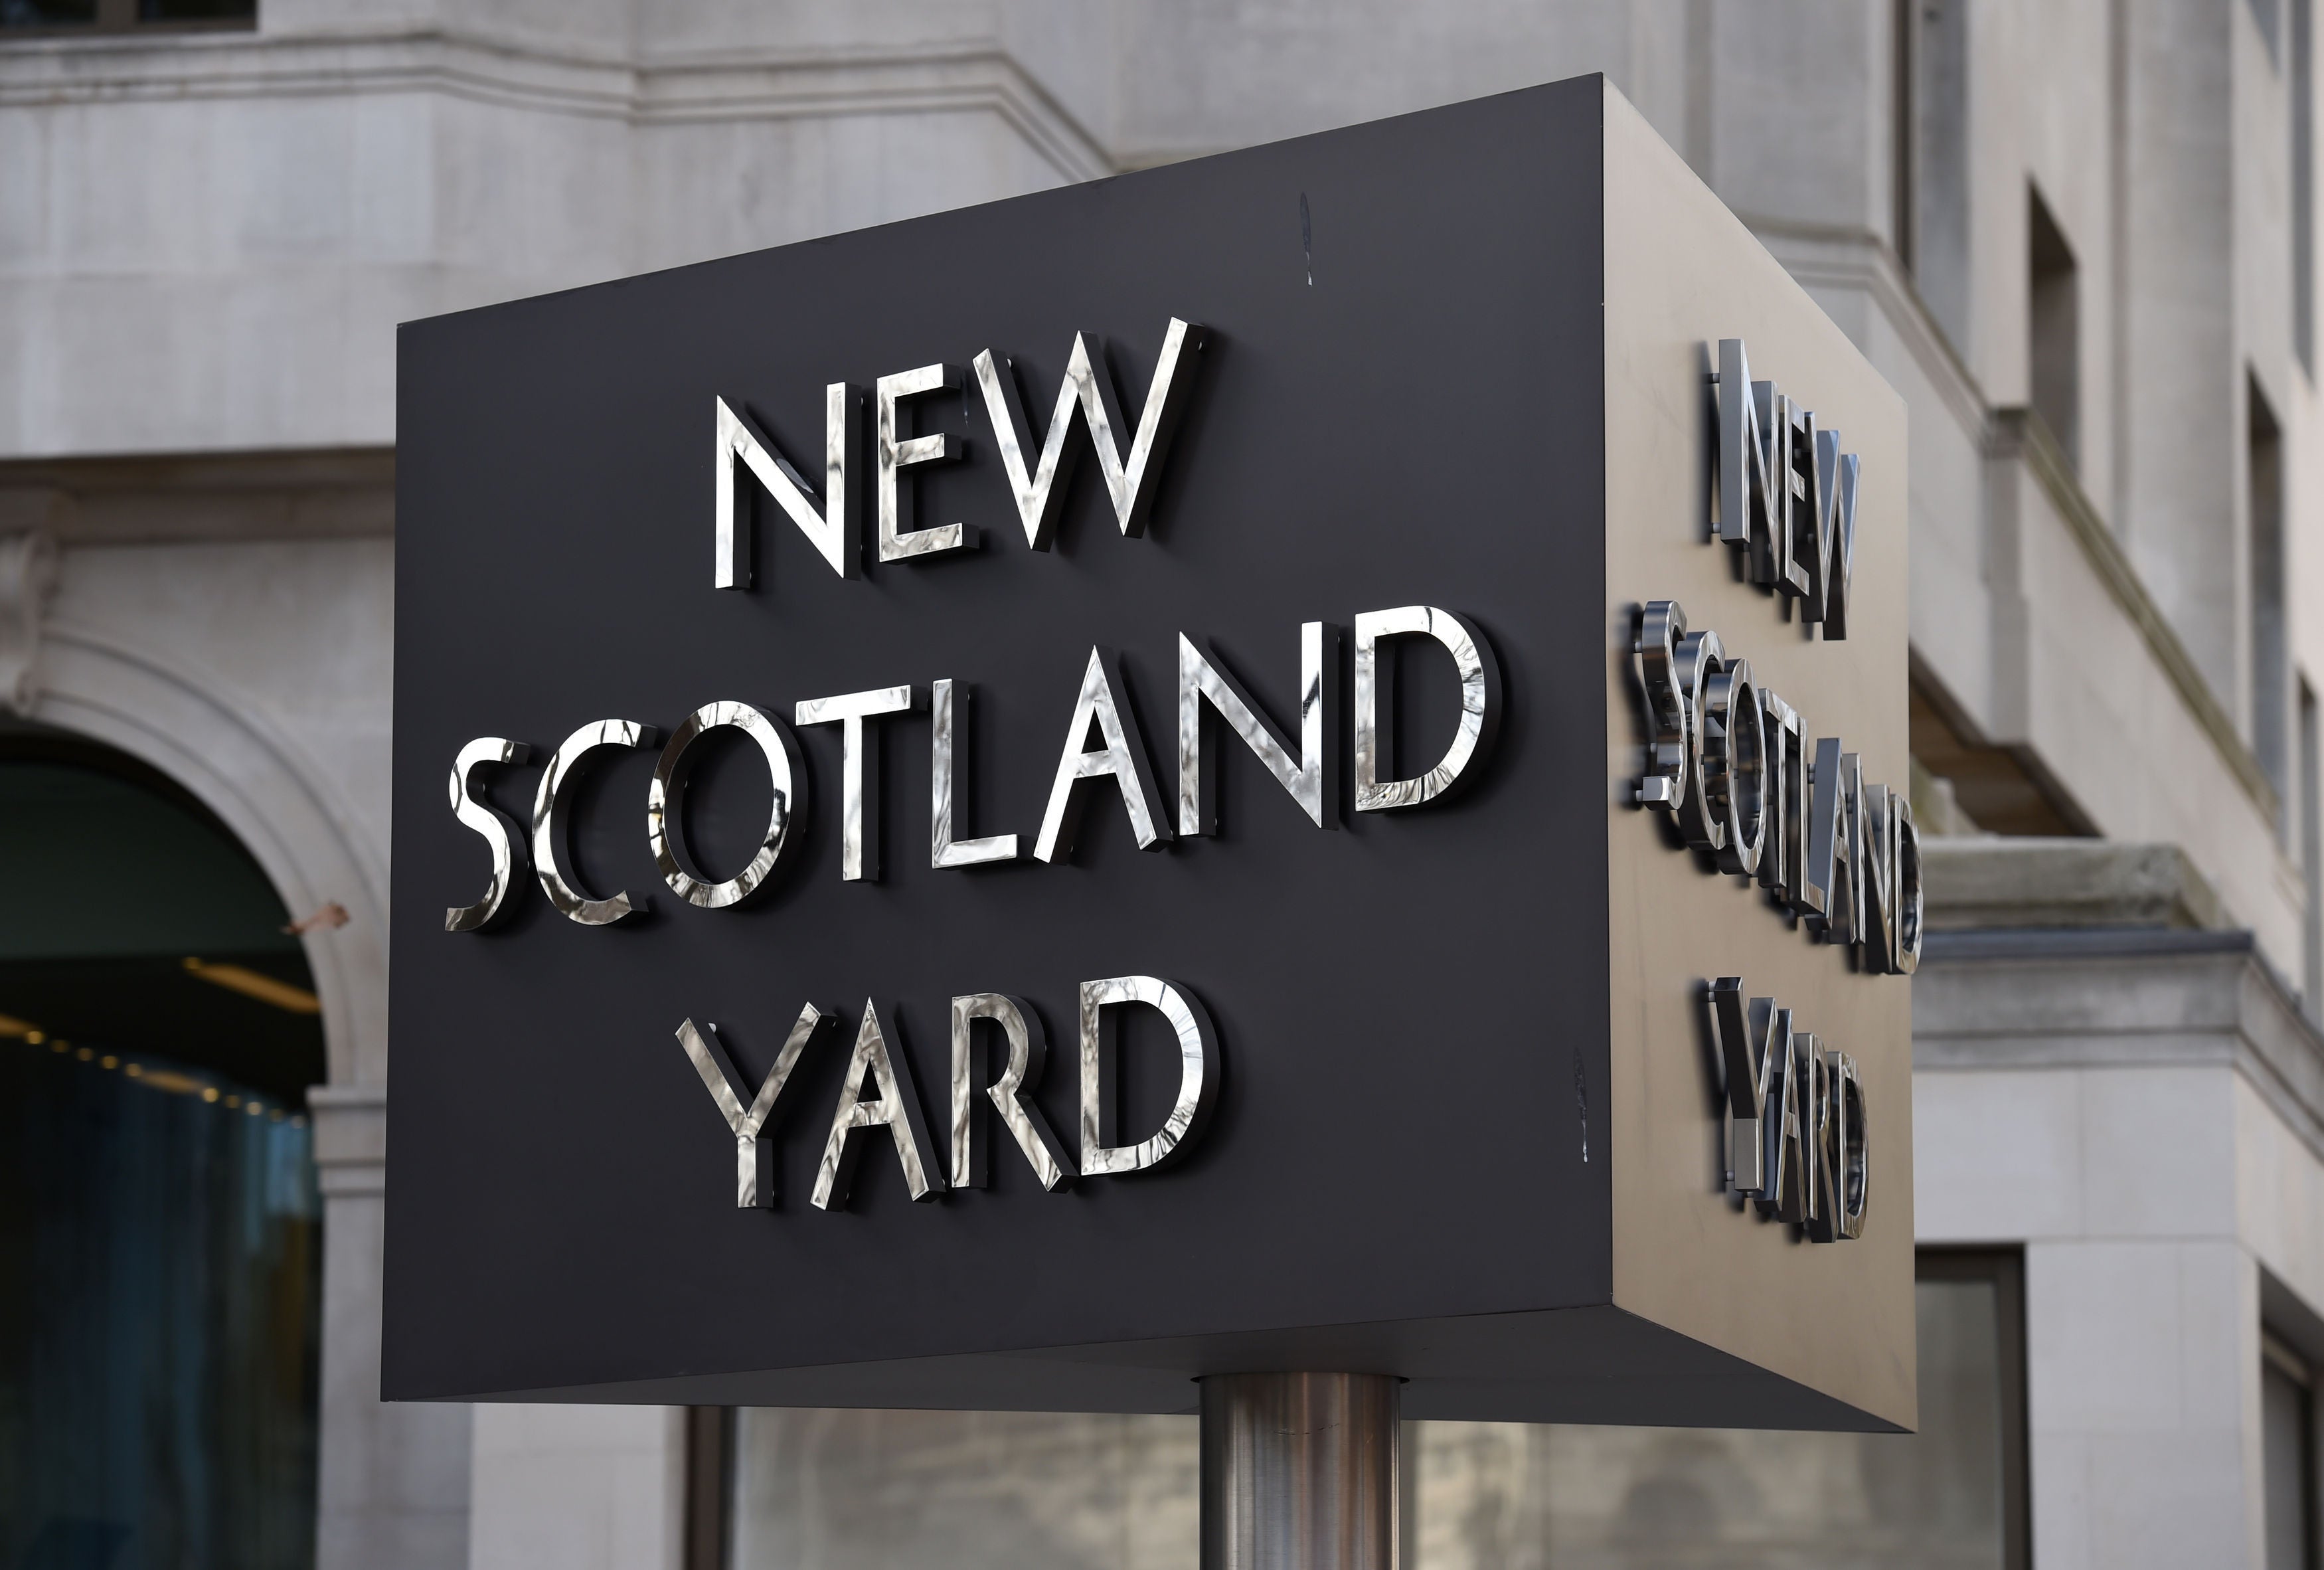 Scotland Yard at centre of inquiry ordered by Theresa May in 2015, after report found murdered teenager Stephen Lawrence’s family were spied upon